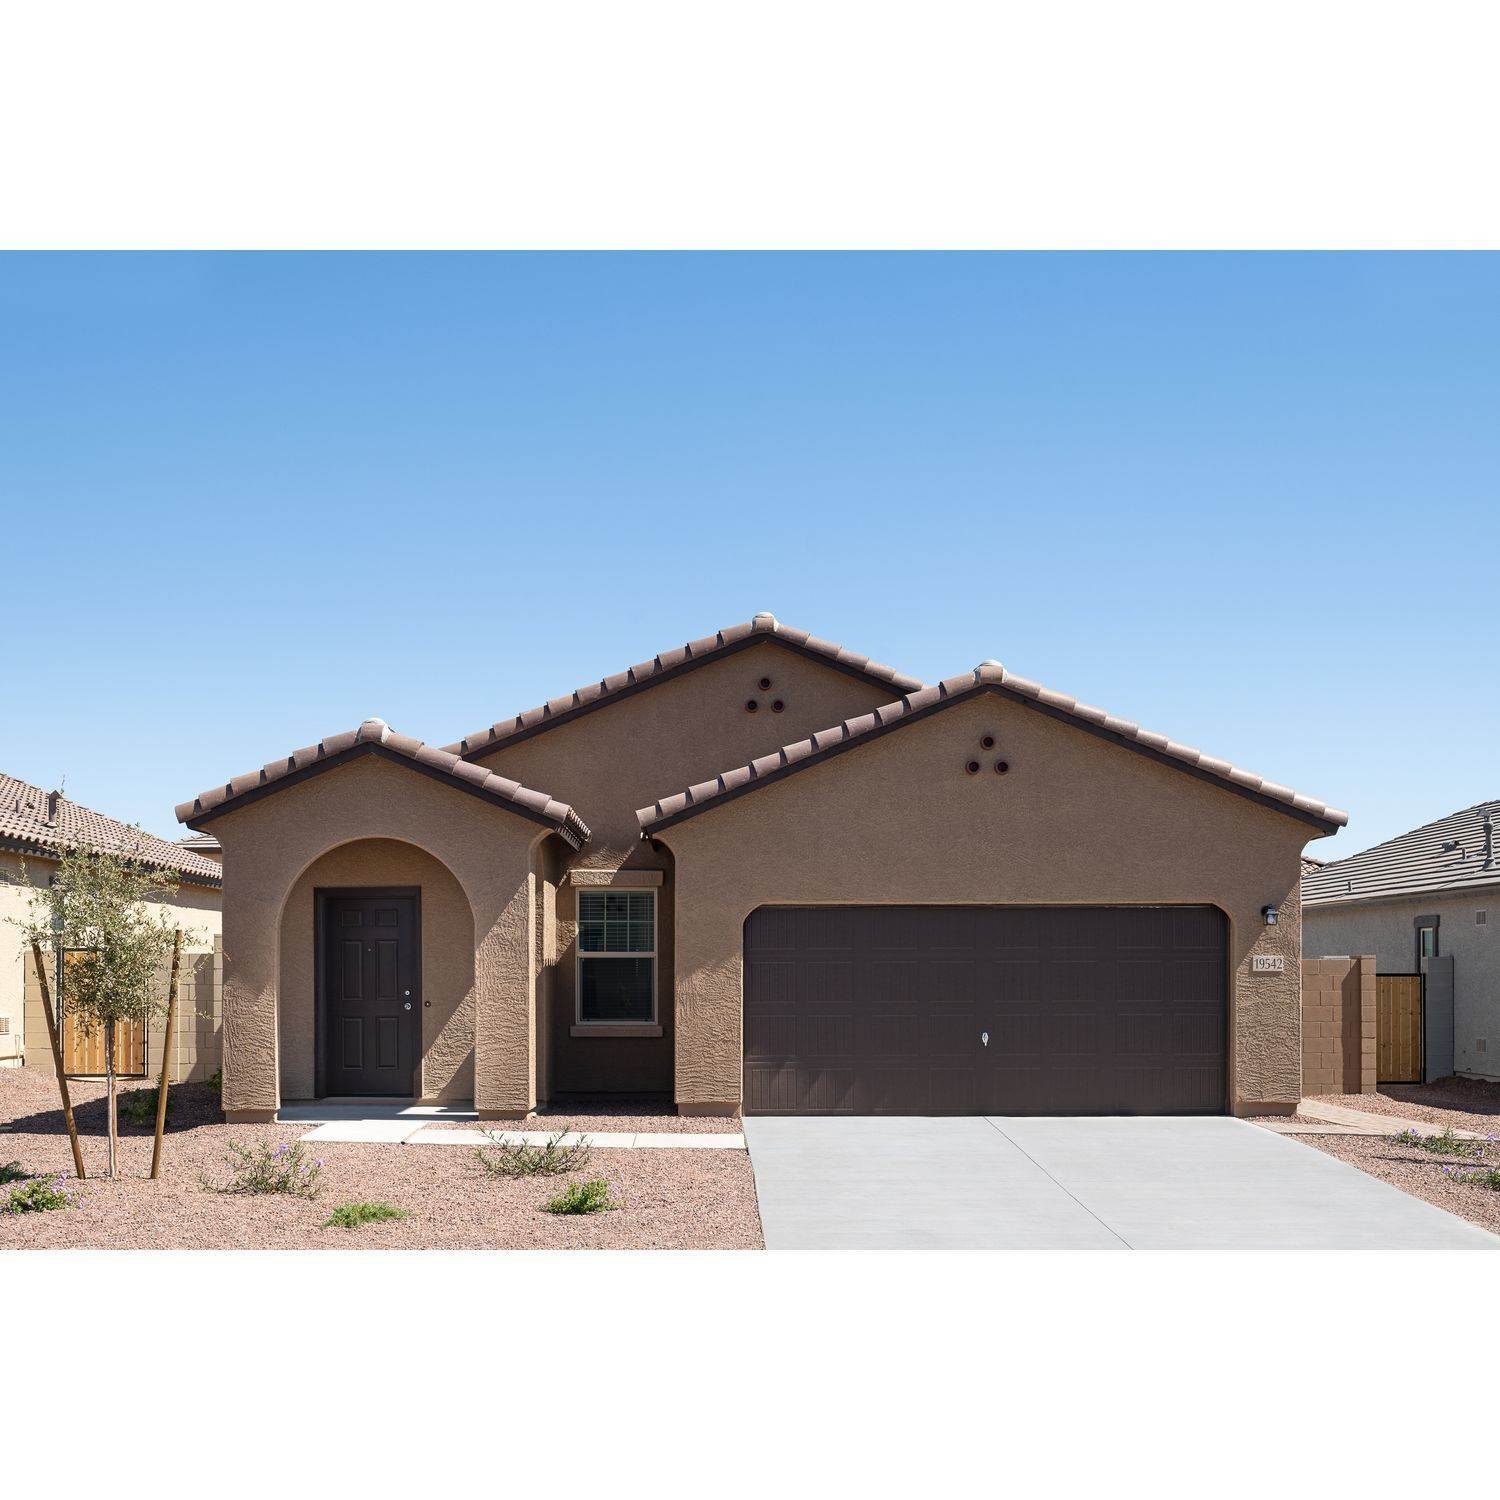 3. Villages at Accomazzo building at 3649 S. 98th Glen, Tolleson, AZ 85353